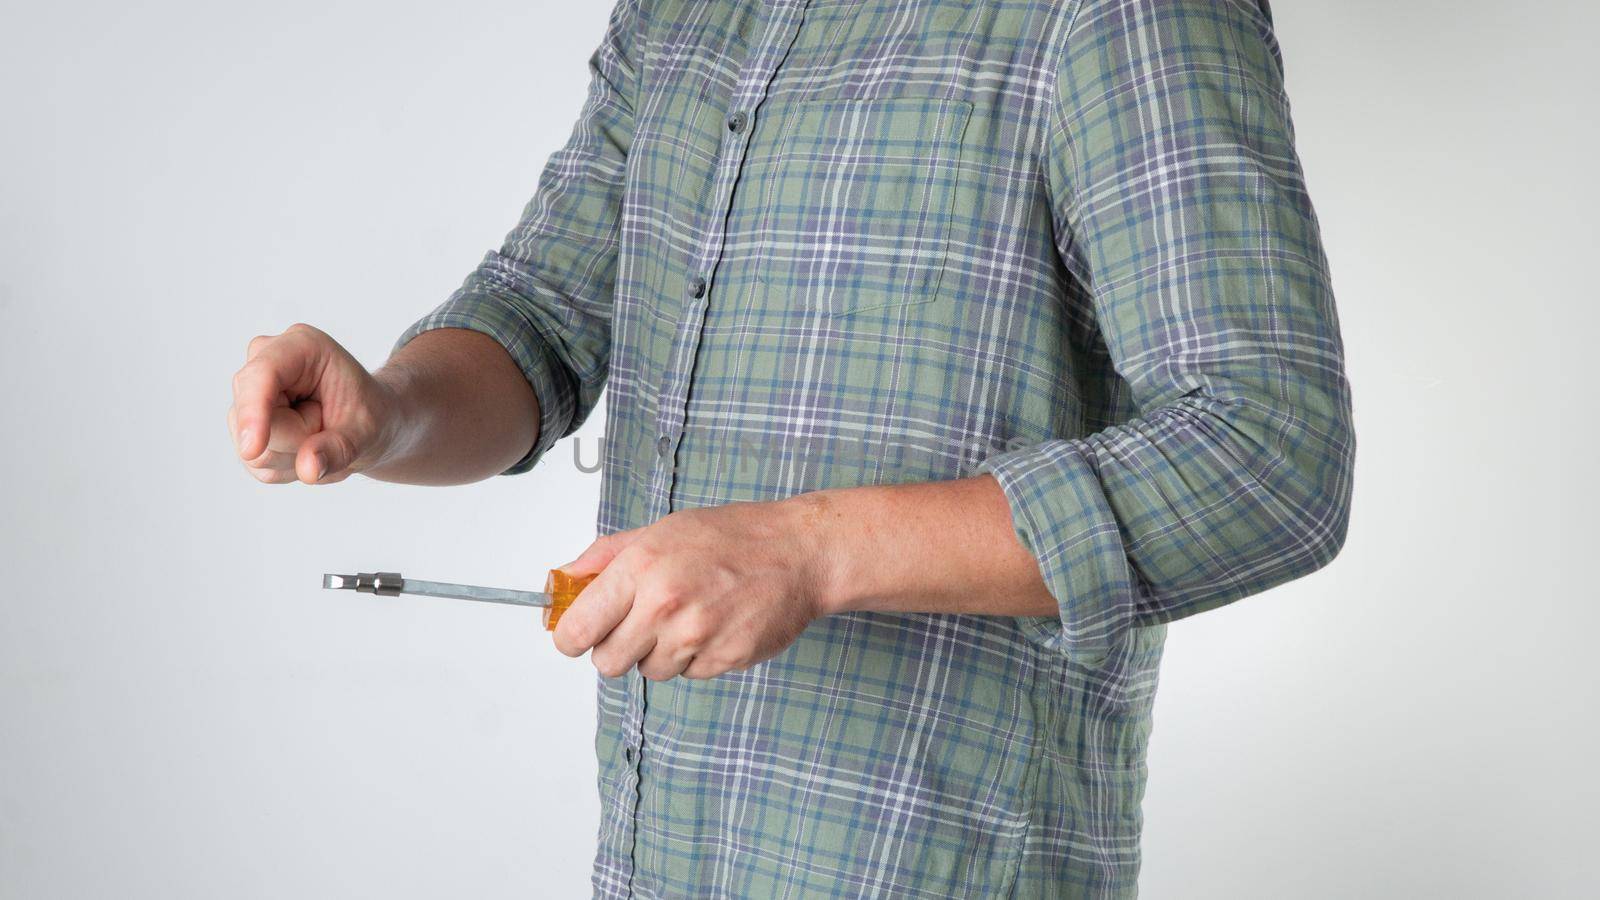 A man holds a screwdriver in his hand on a white background by voktybre